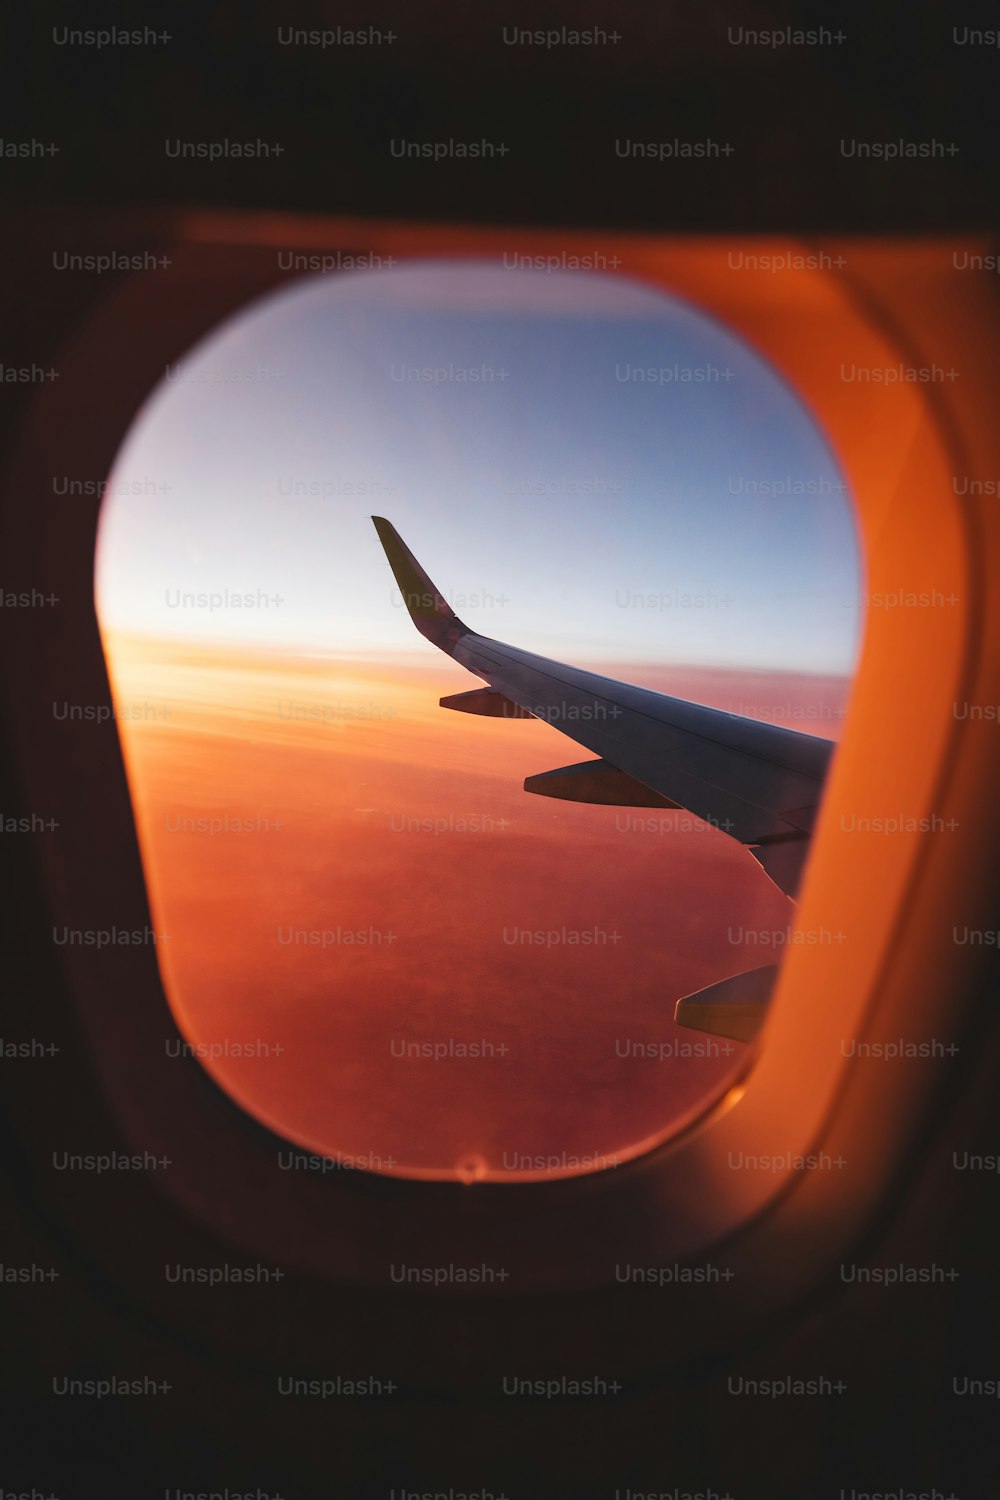 View from the window of the aircraft on the wing over the colorful sunset and illuminated vivid clouds